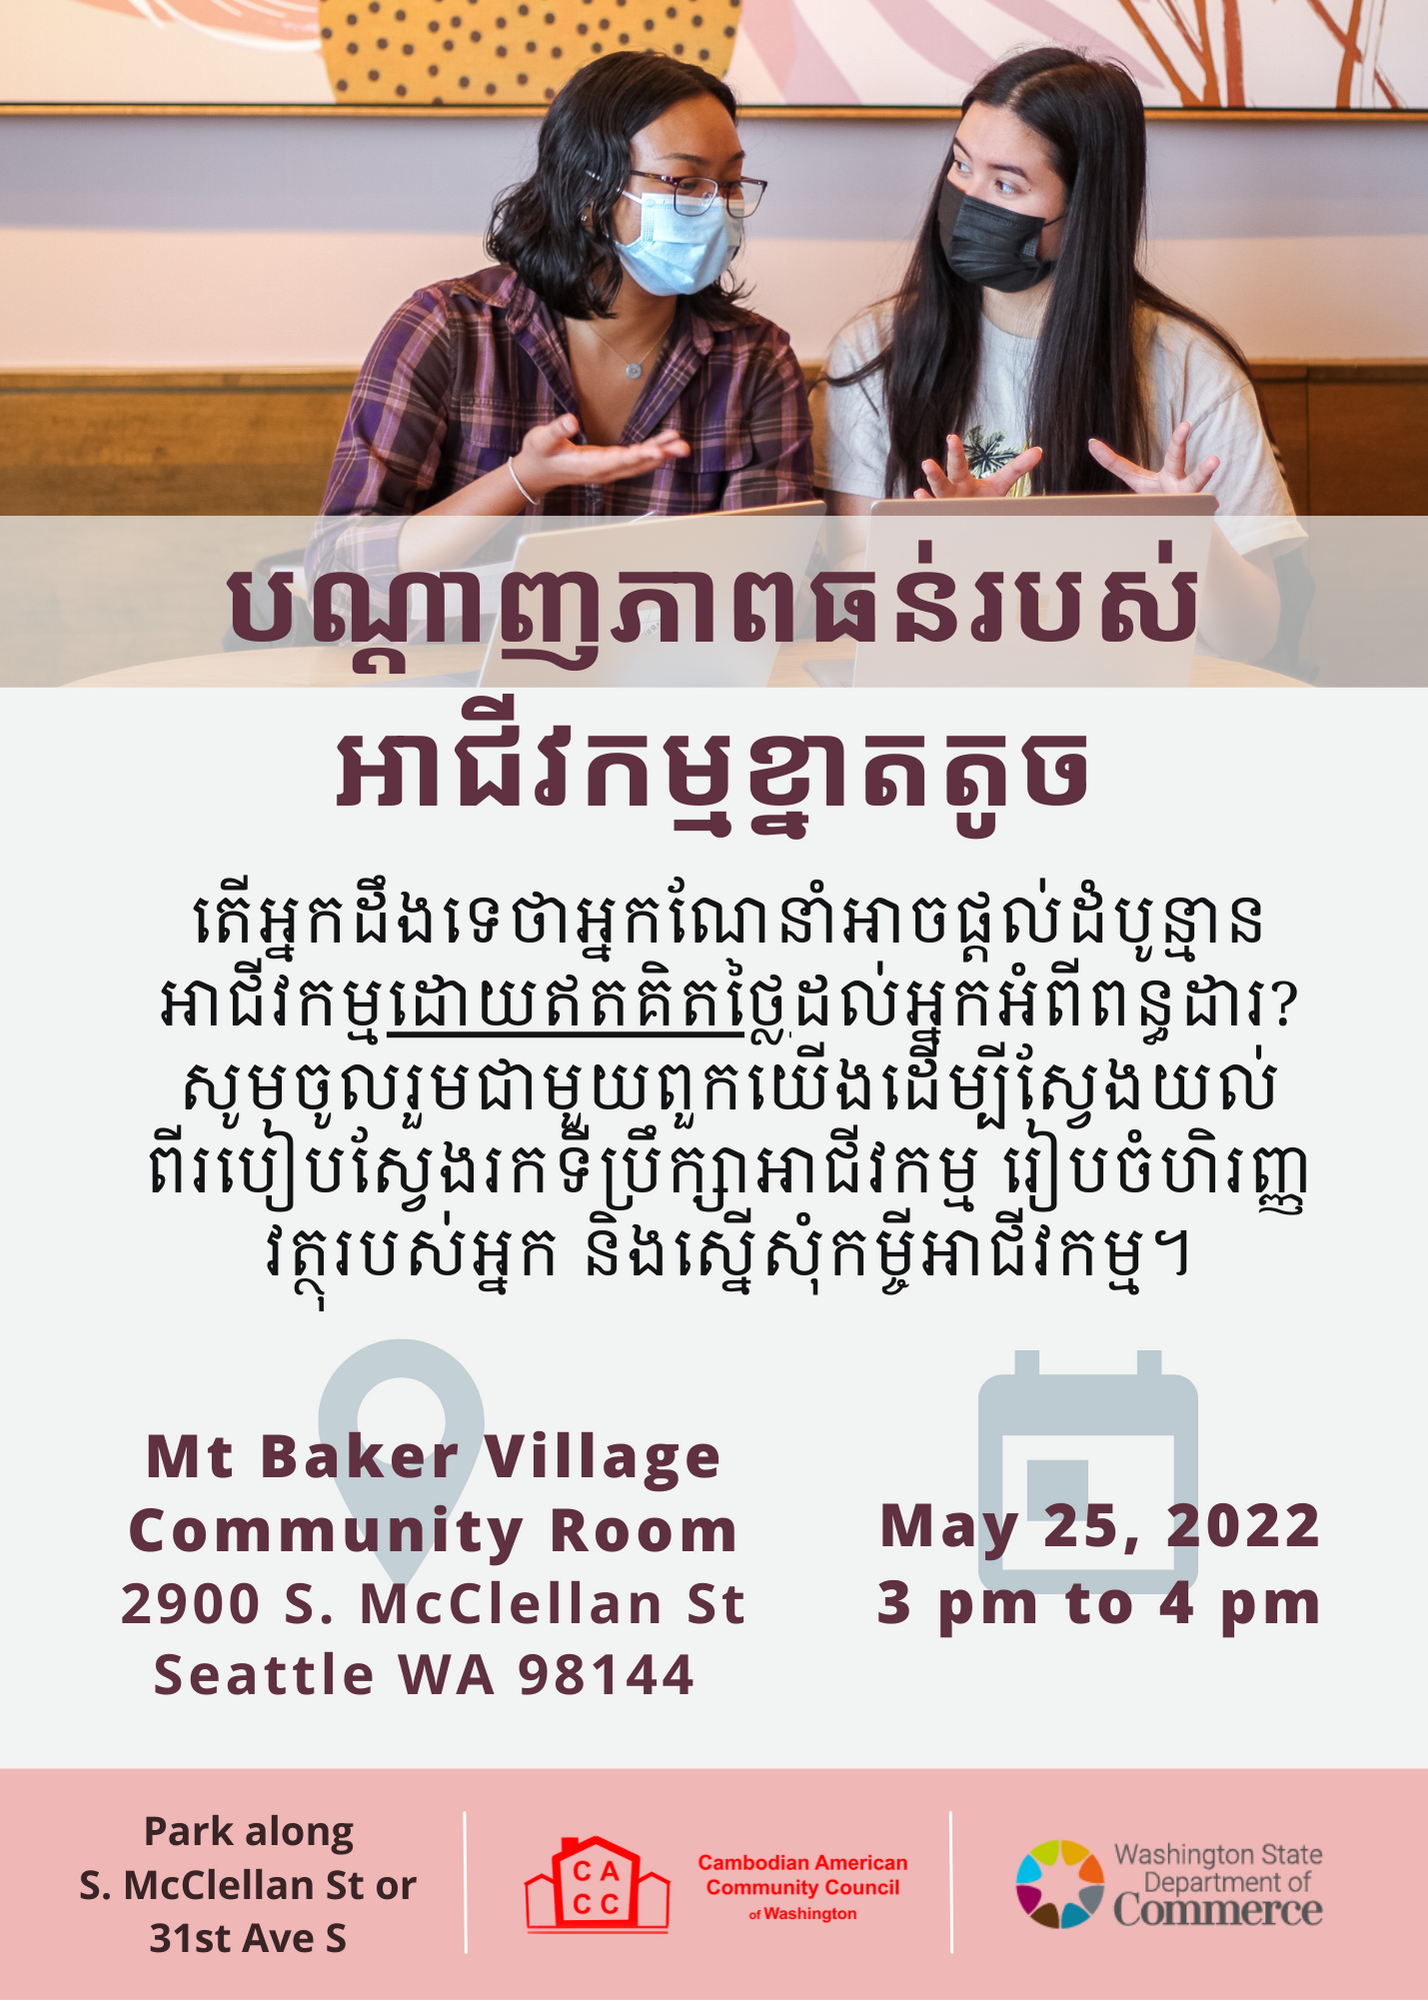 Khmer flyer for Department of Commerce event on May 25